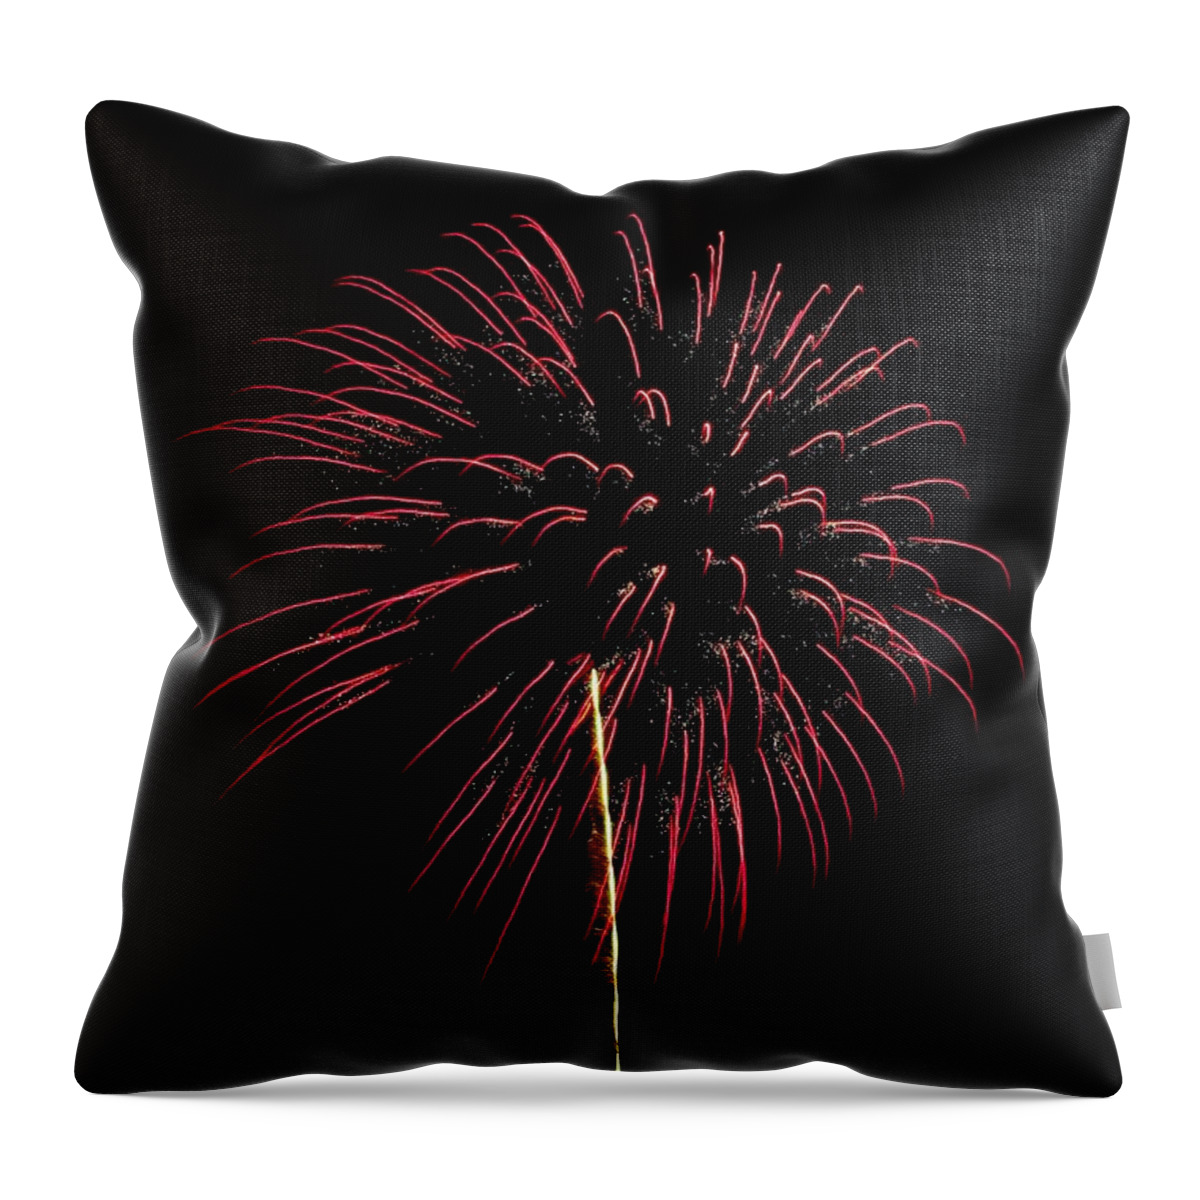 Fireworks Throw Pillow featuring the photograph Squiggles 28 by Pamela Critchlow